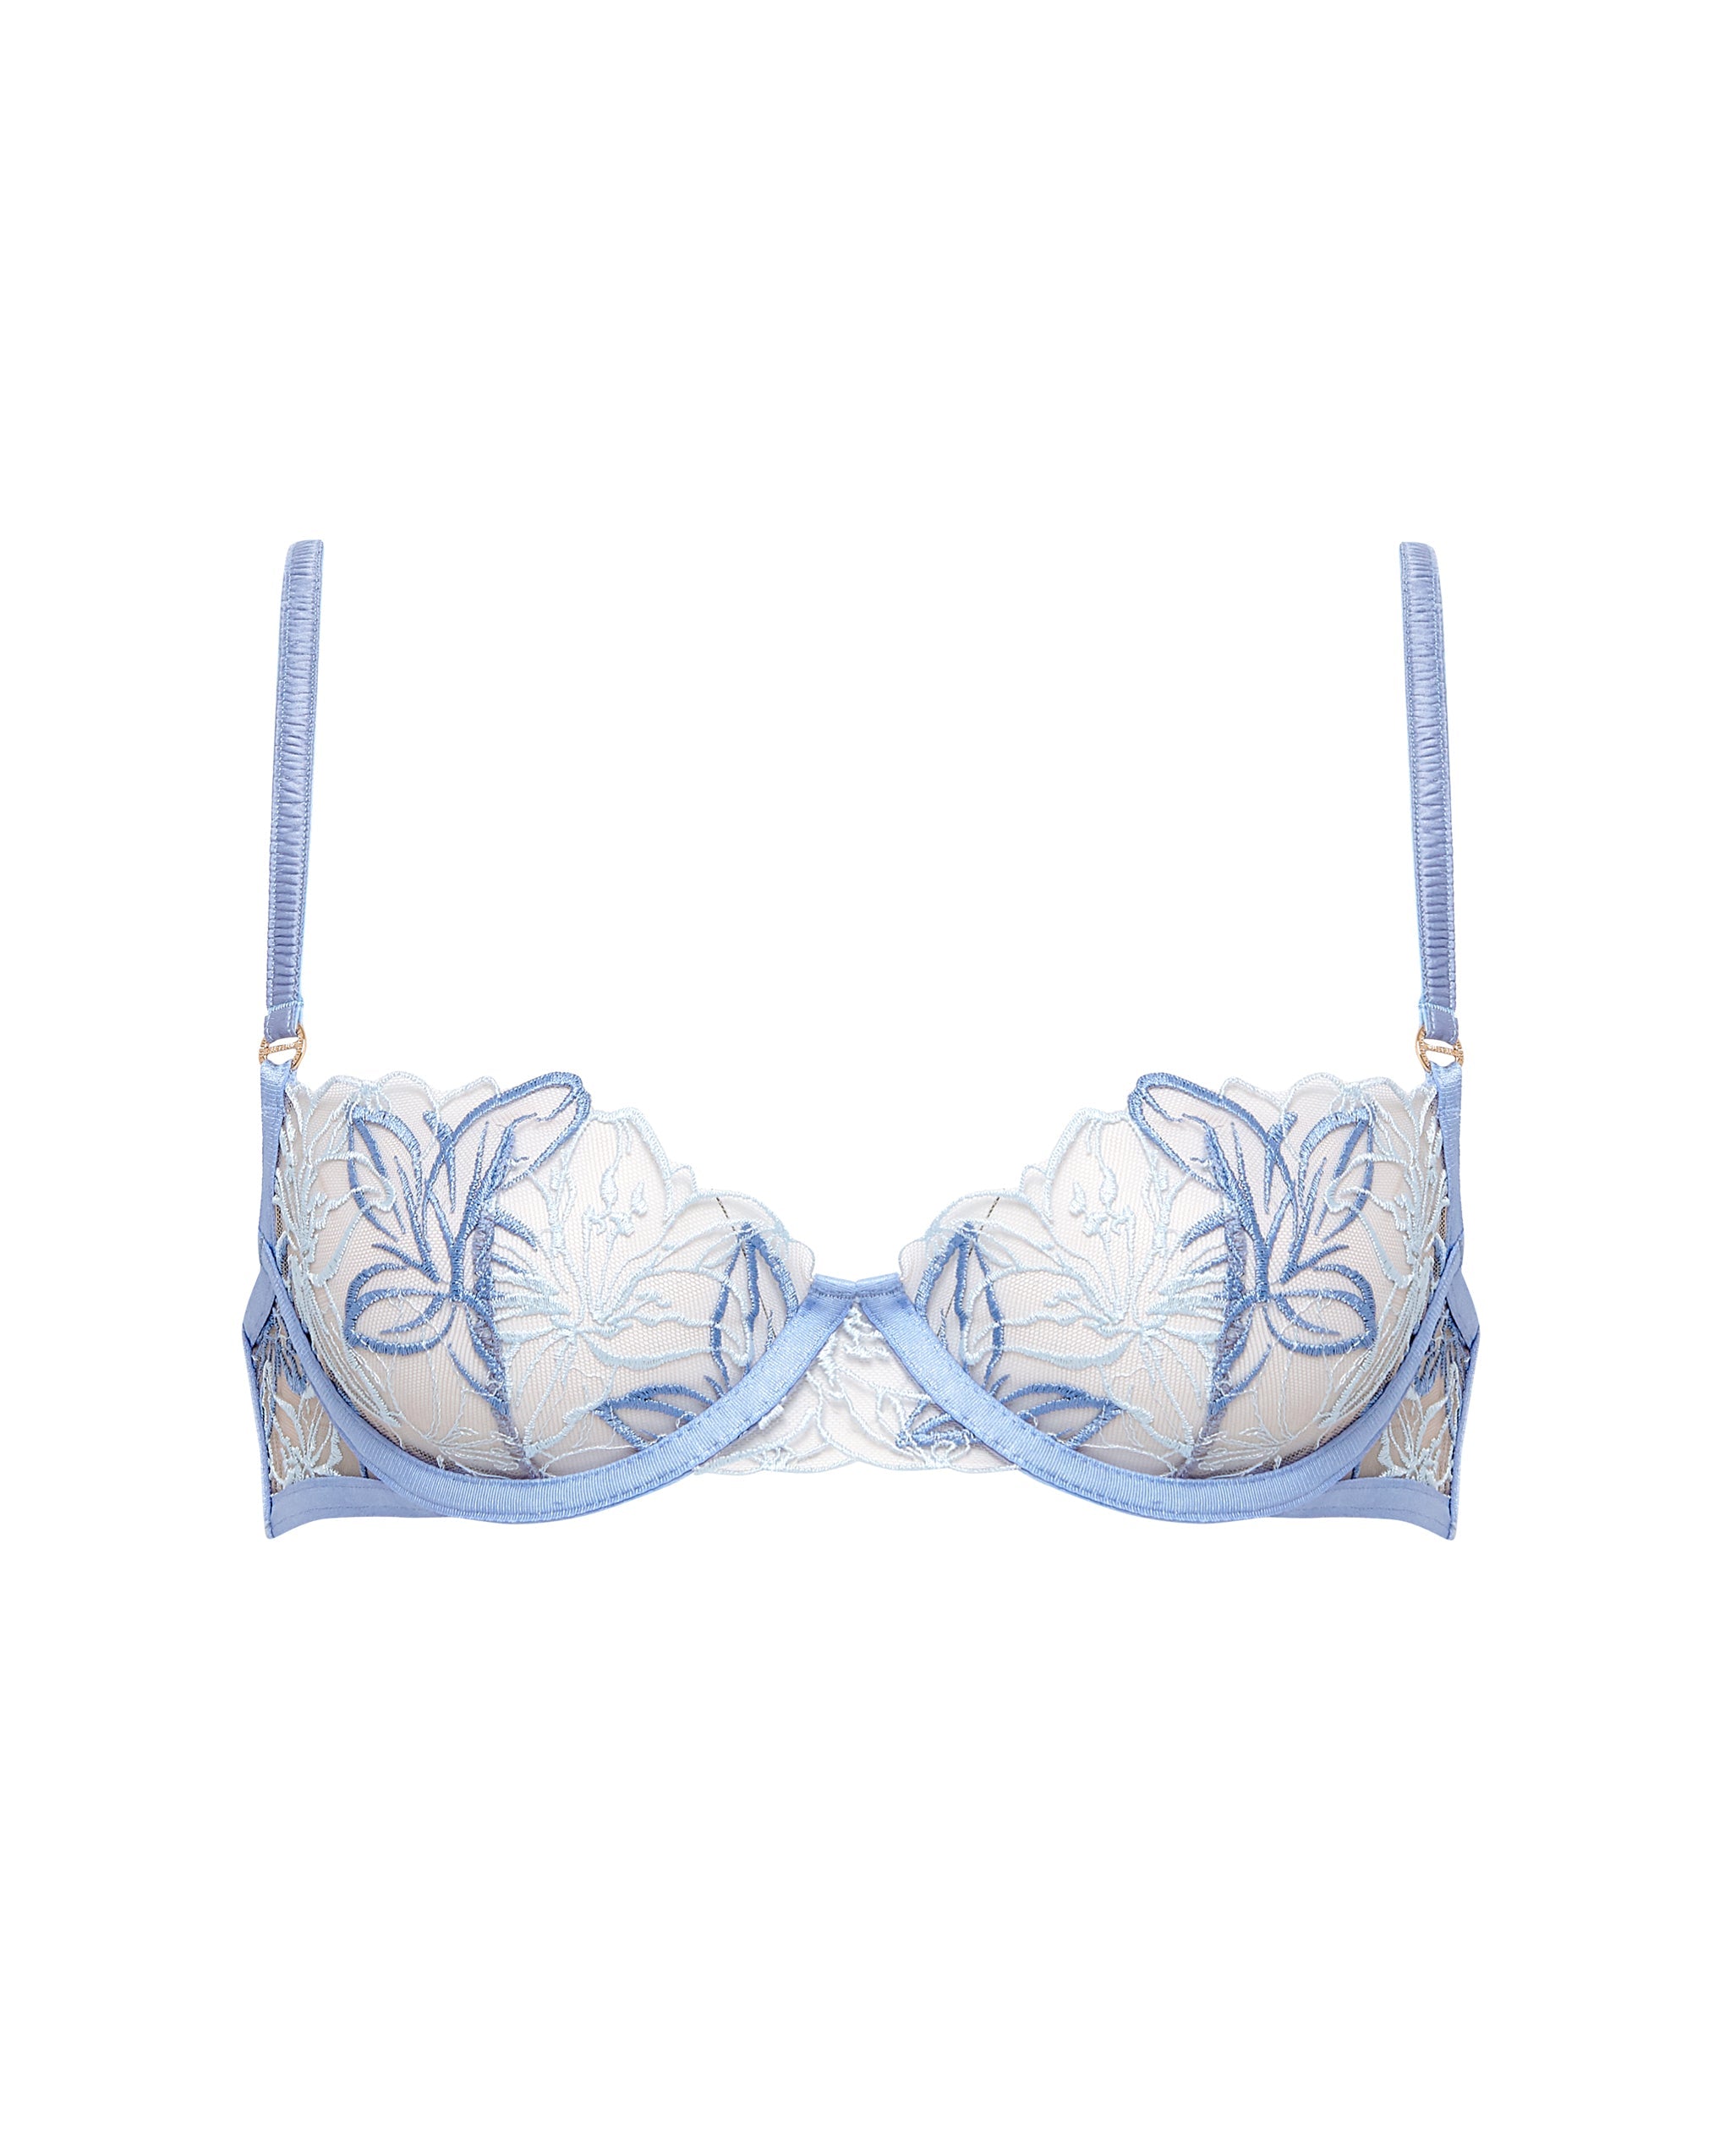 Buy online Blue Lace Detailed Bra And Panty Set from lingerie for